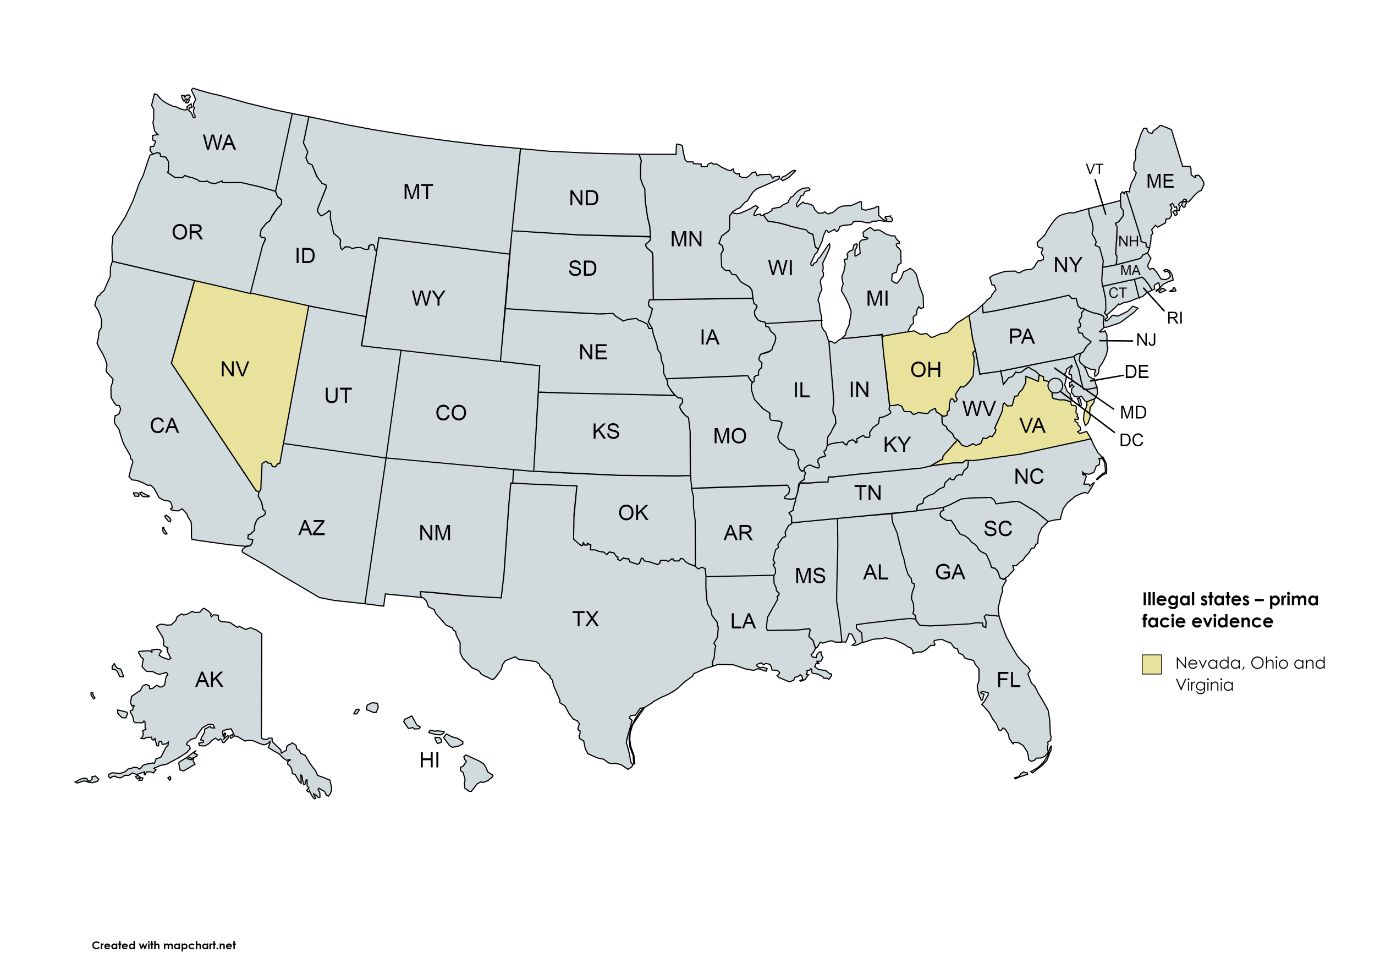 map of states of United states of America highlighting the state in yellow having illegal prima facie status in case of lock picking. the states are nevada, ohio and virginia